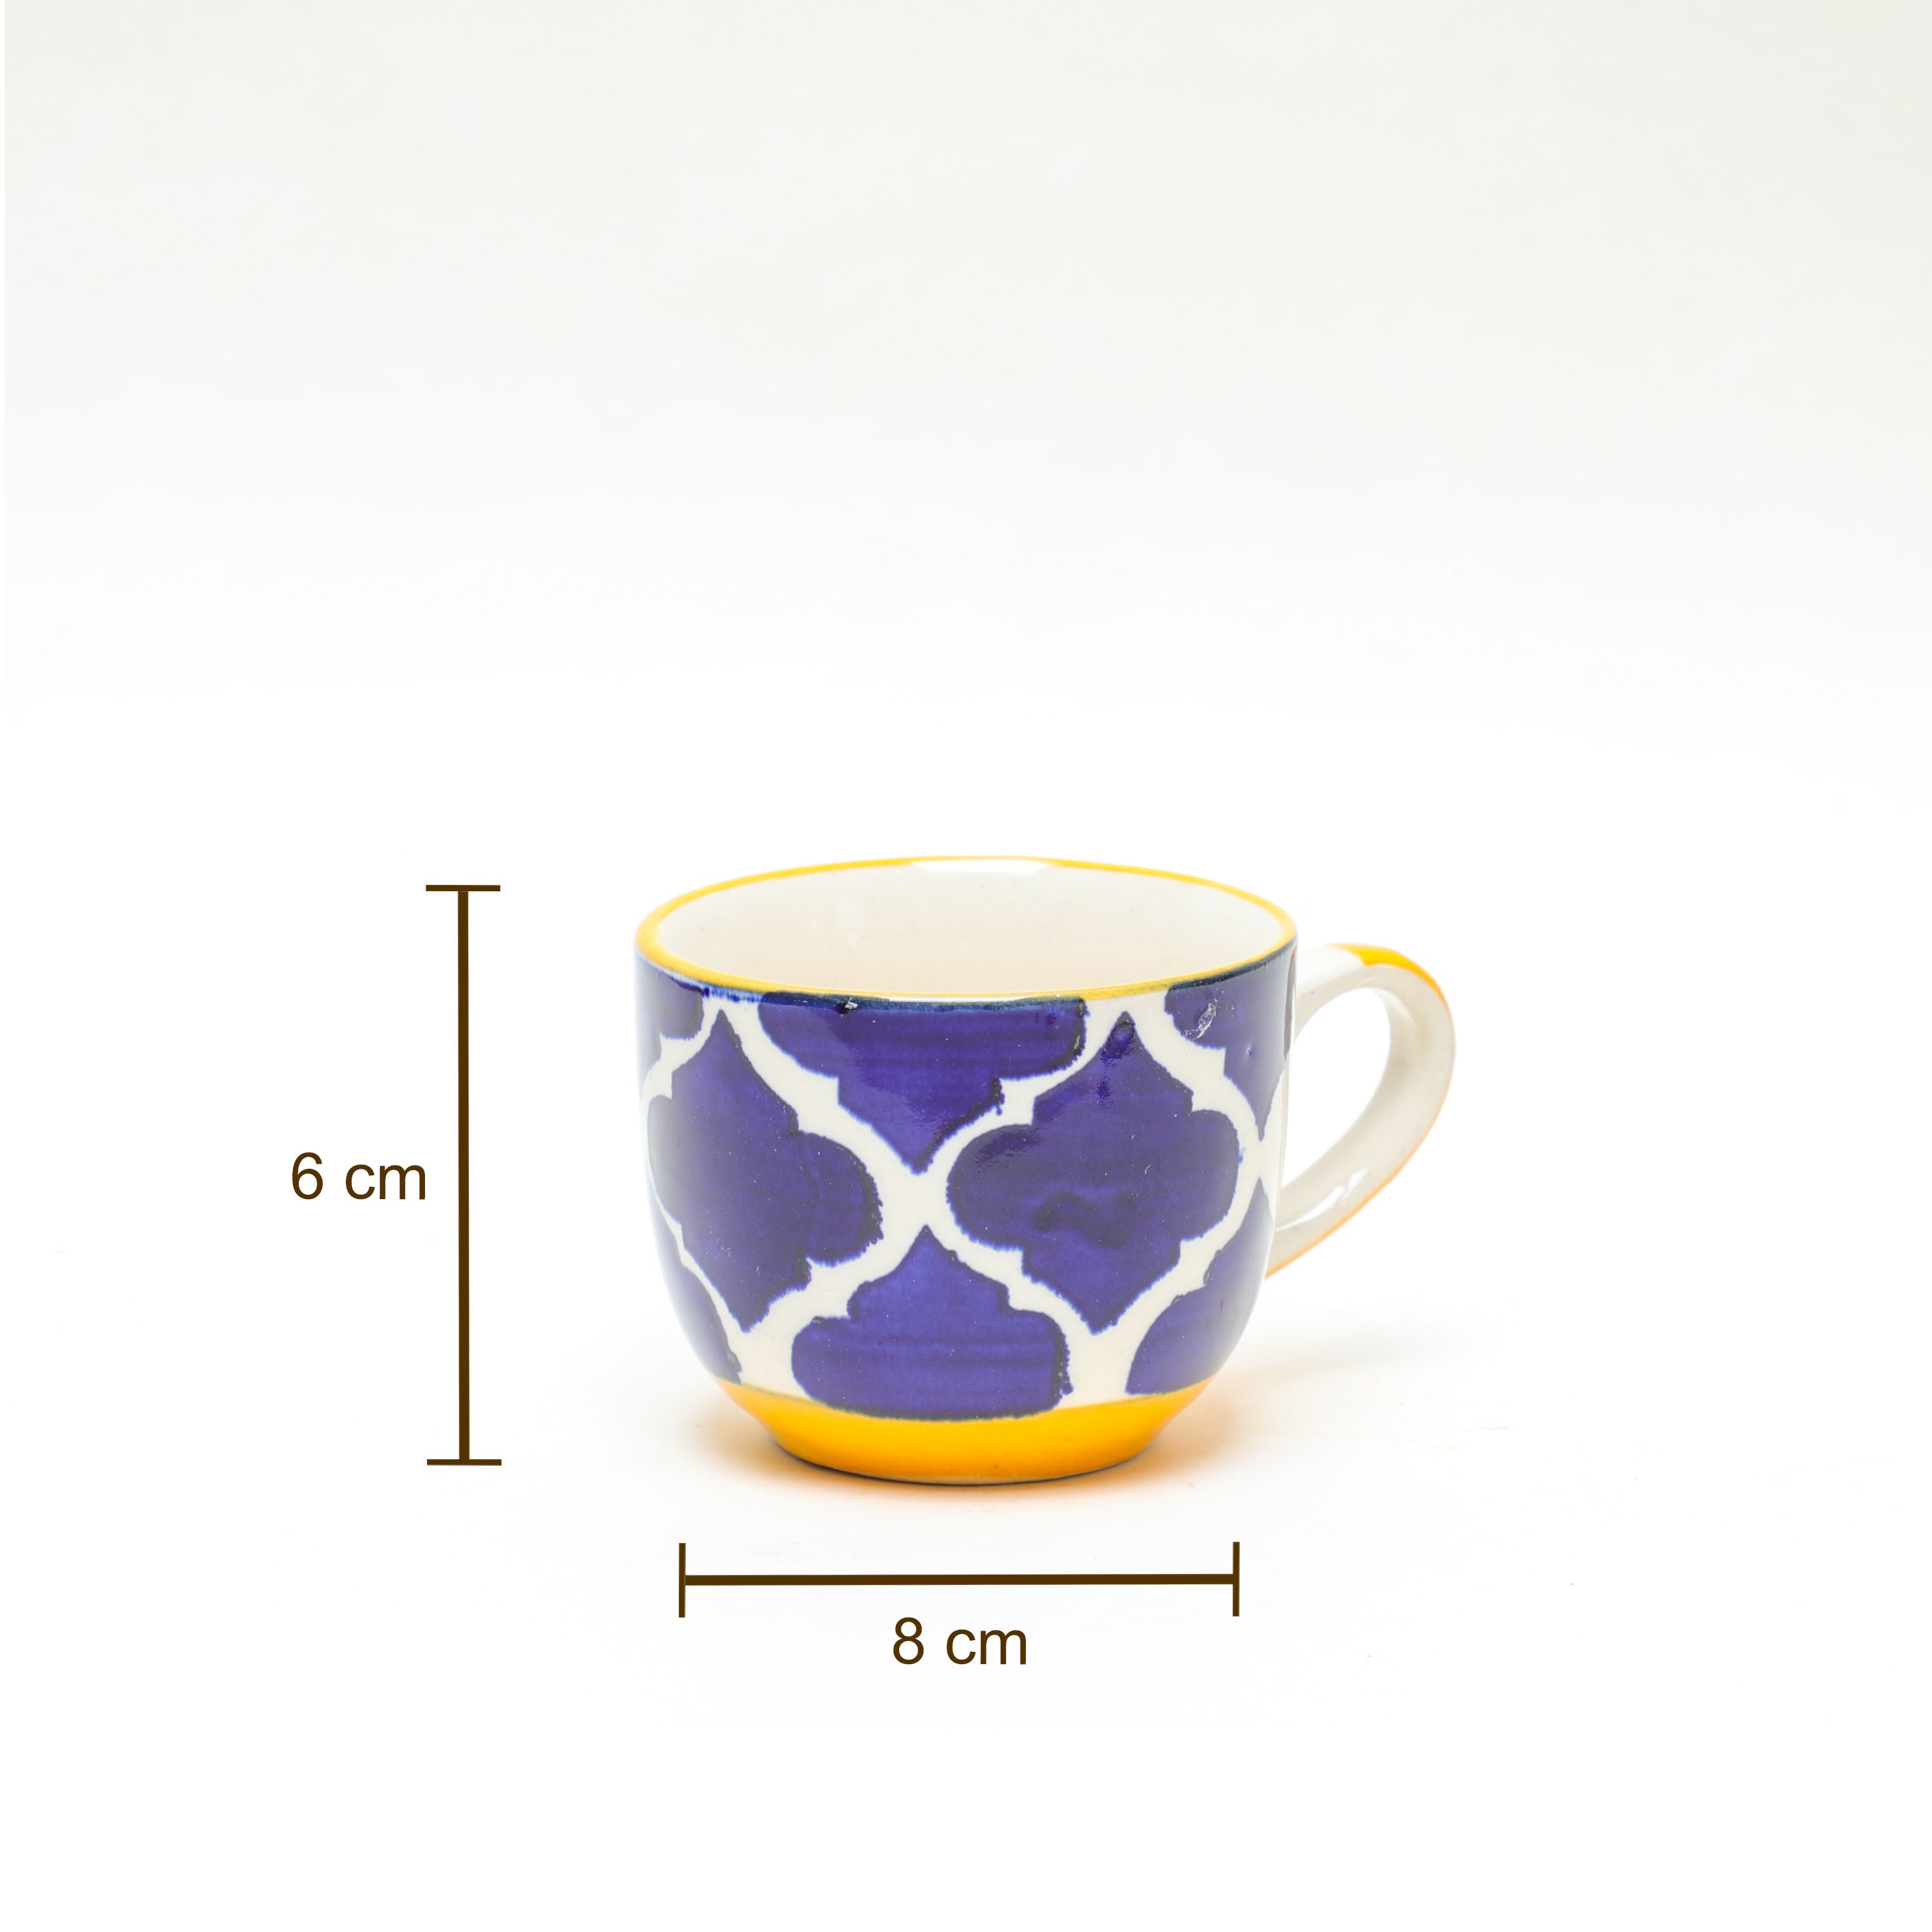 Small tea cups for gifting to your loved ones